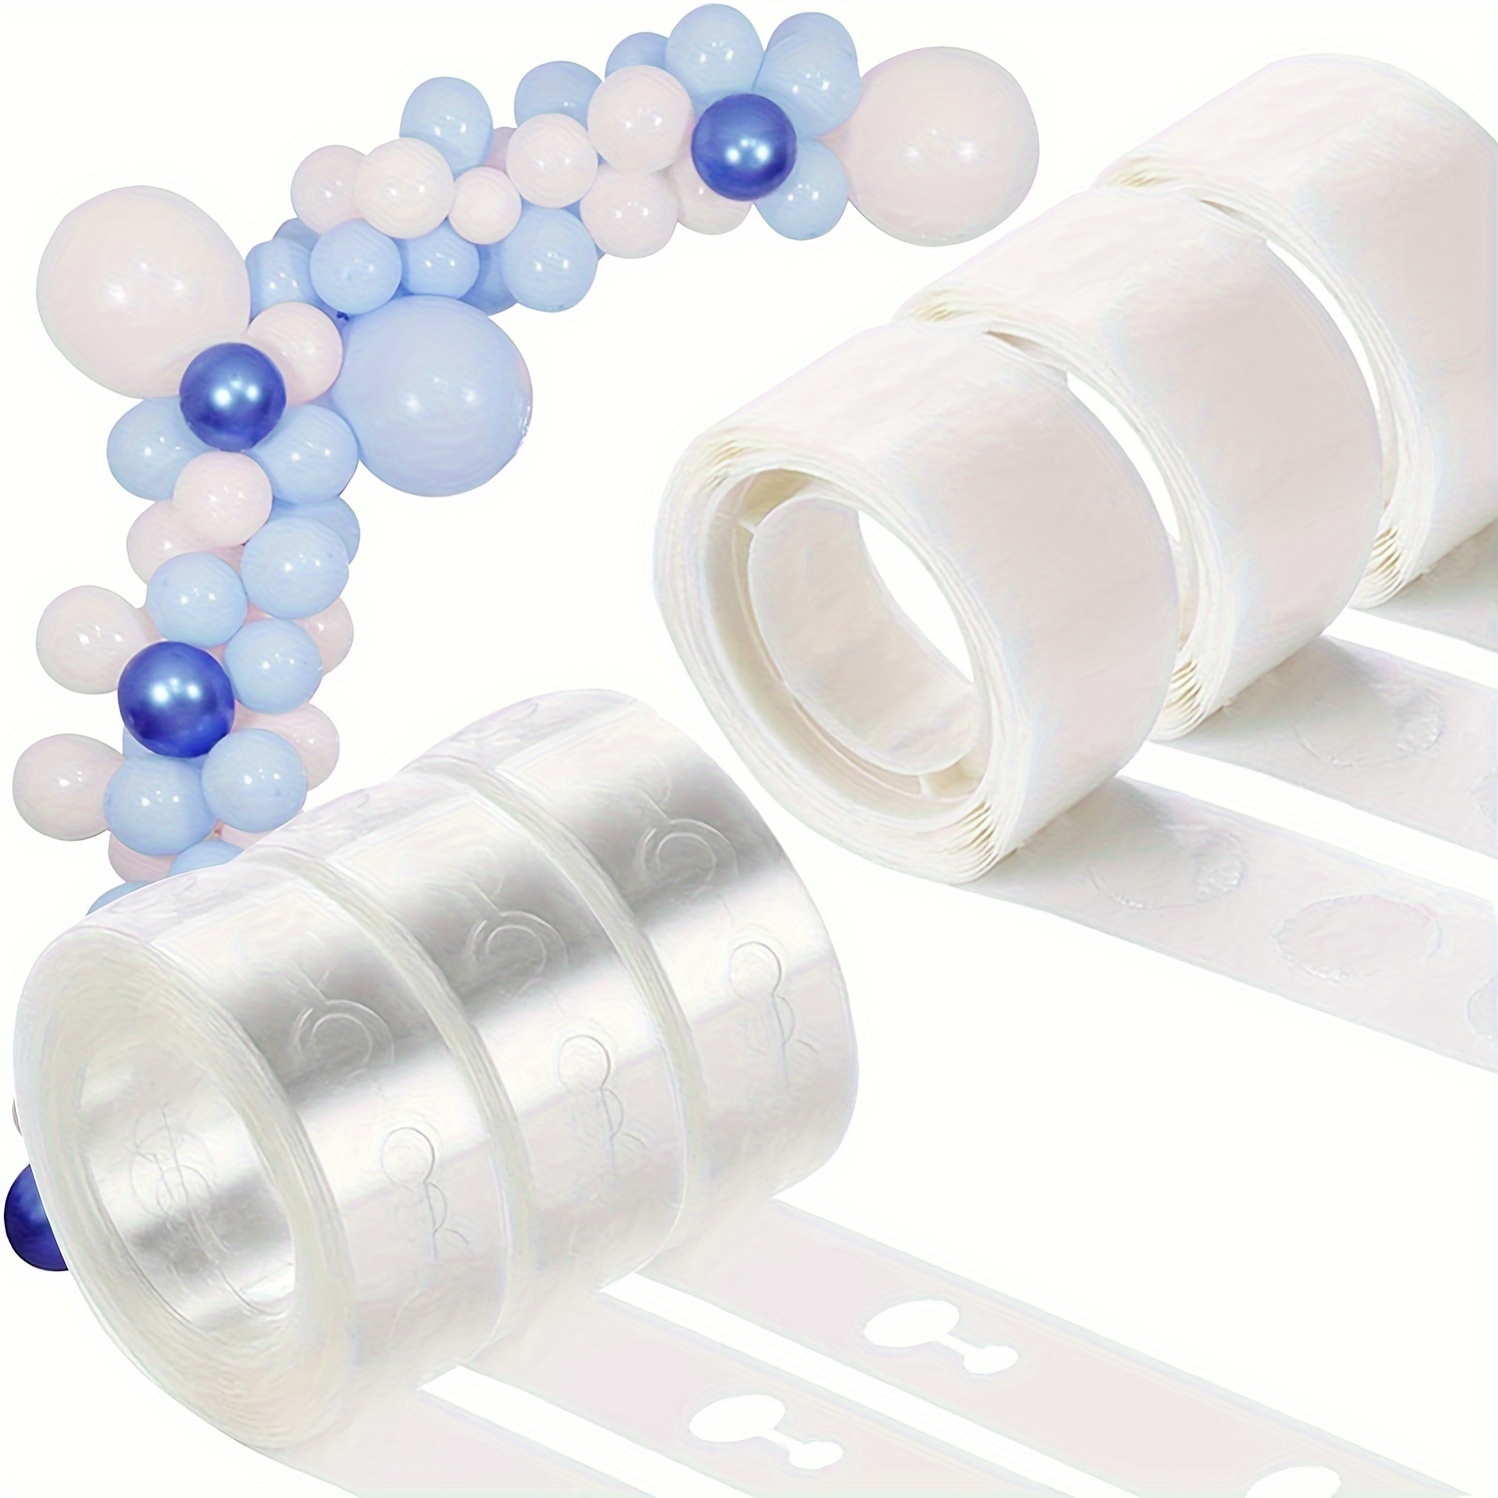 Buy SE7EN Balloon Glue Tape, With Glue Dots, For Birthday Parties,  Christmas, Decorations Online at Best Price of Rs null - bigbasket